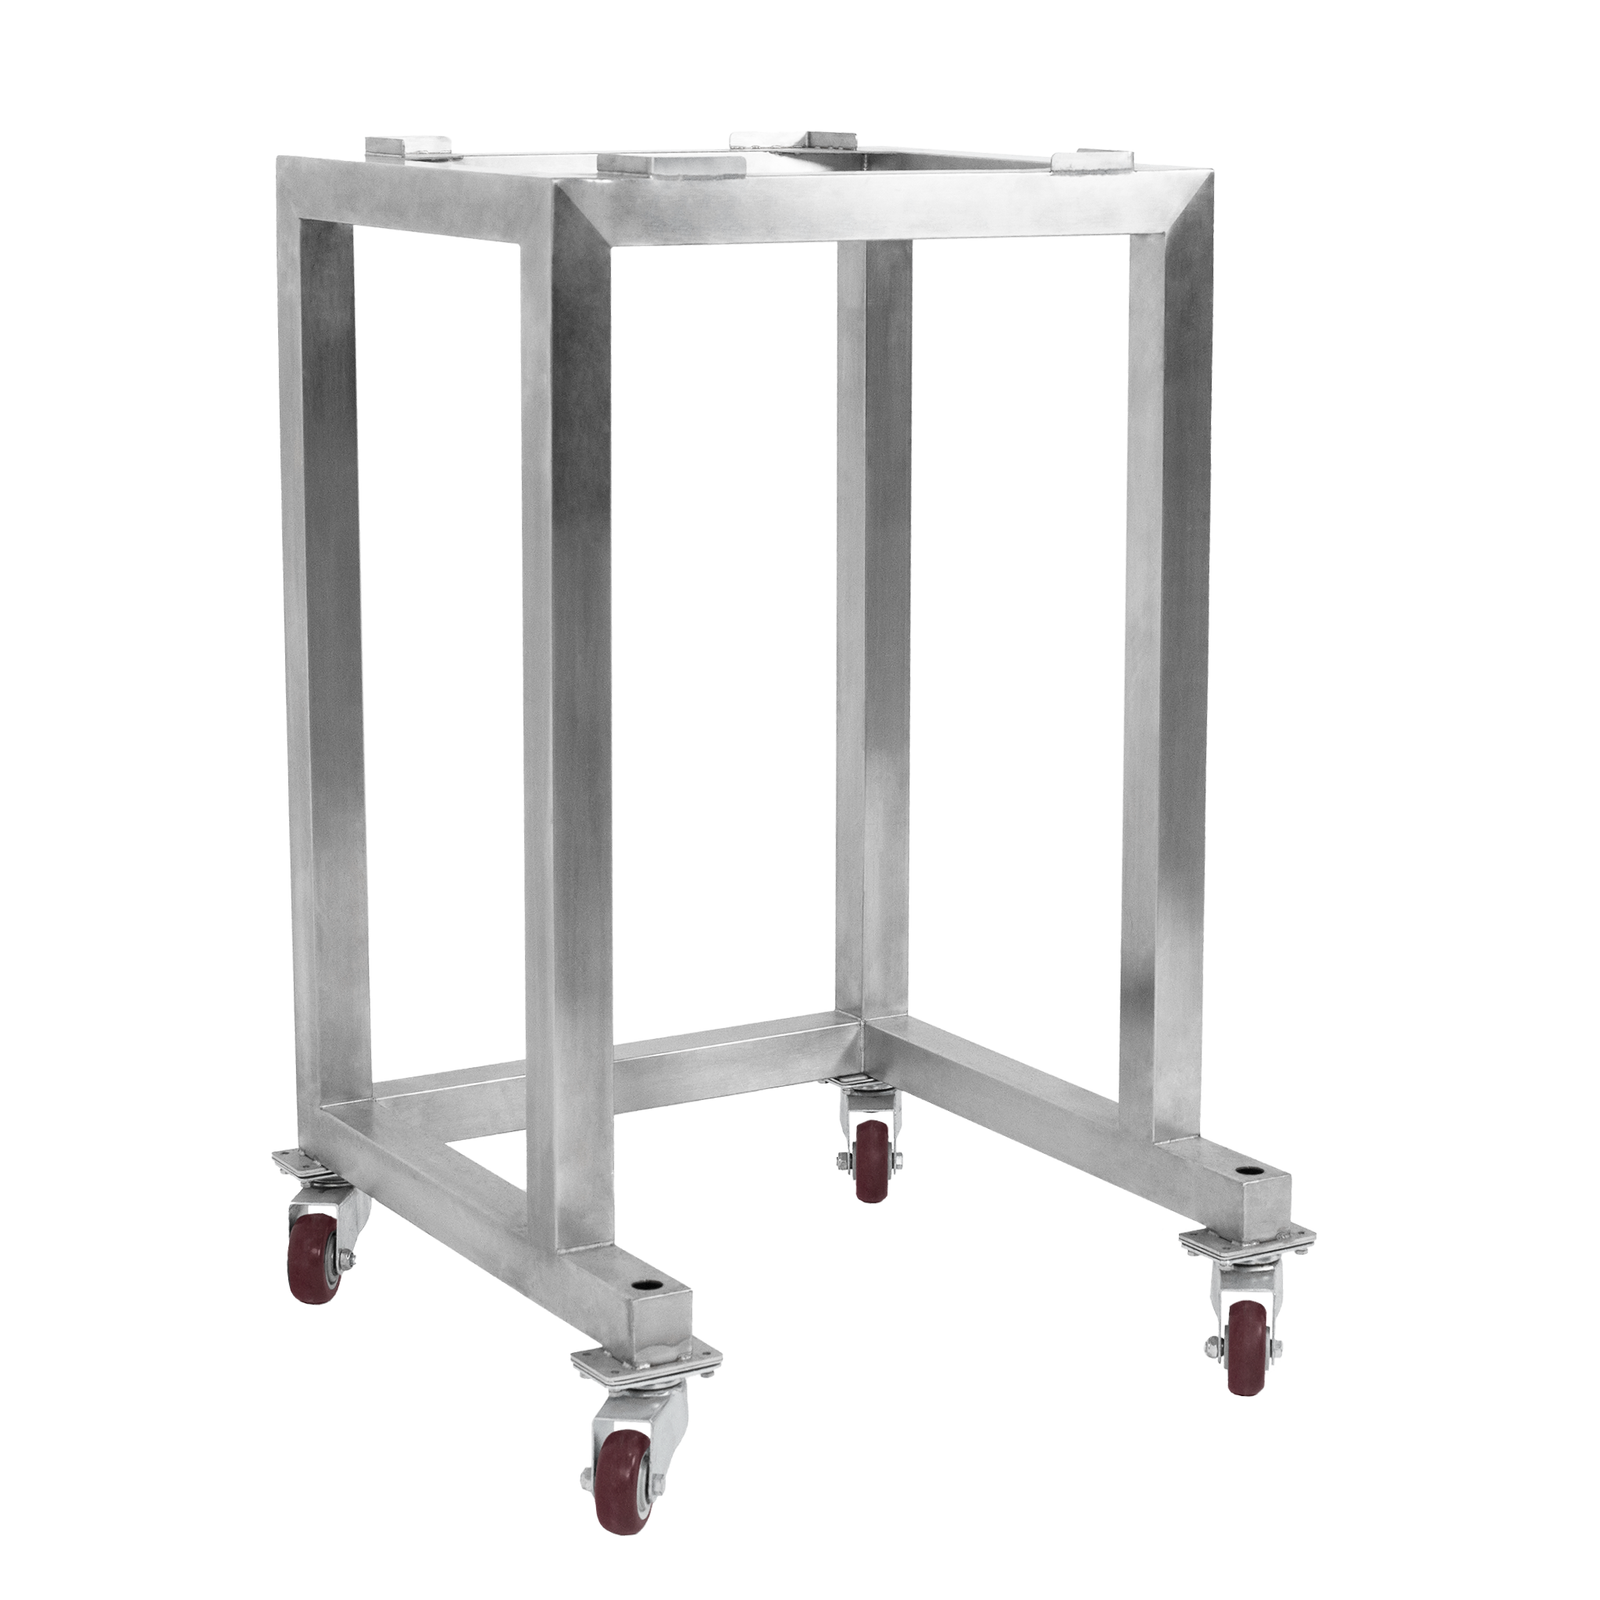 Stainless steel stand with wheels for the JORES TECHNOLOGIES® single head linear weigher